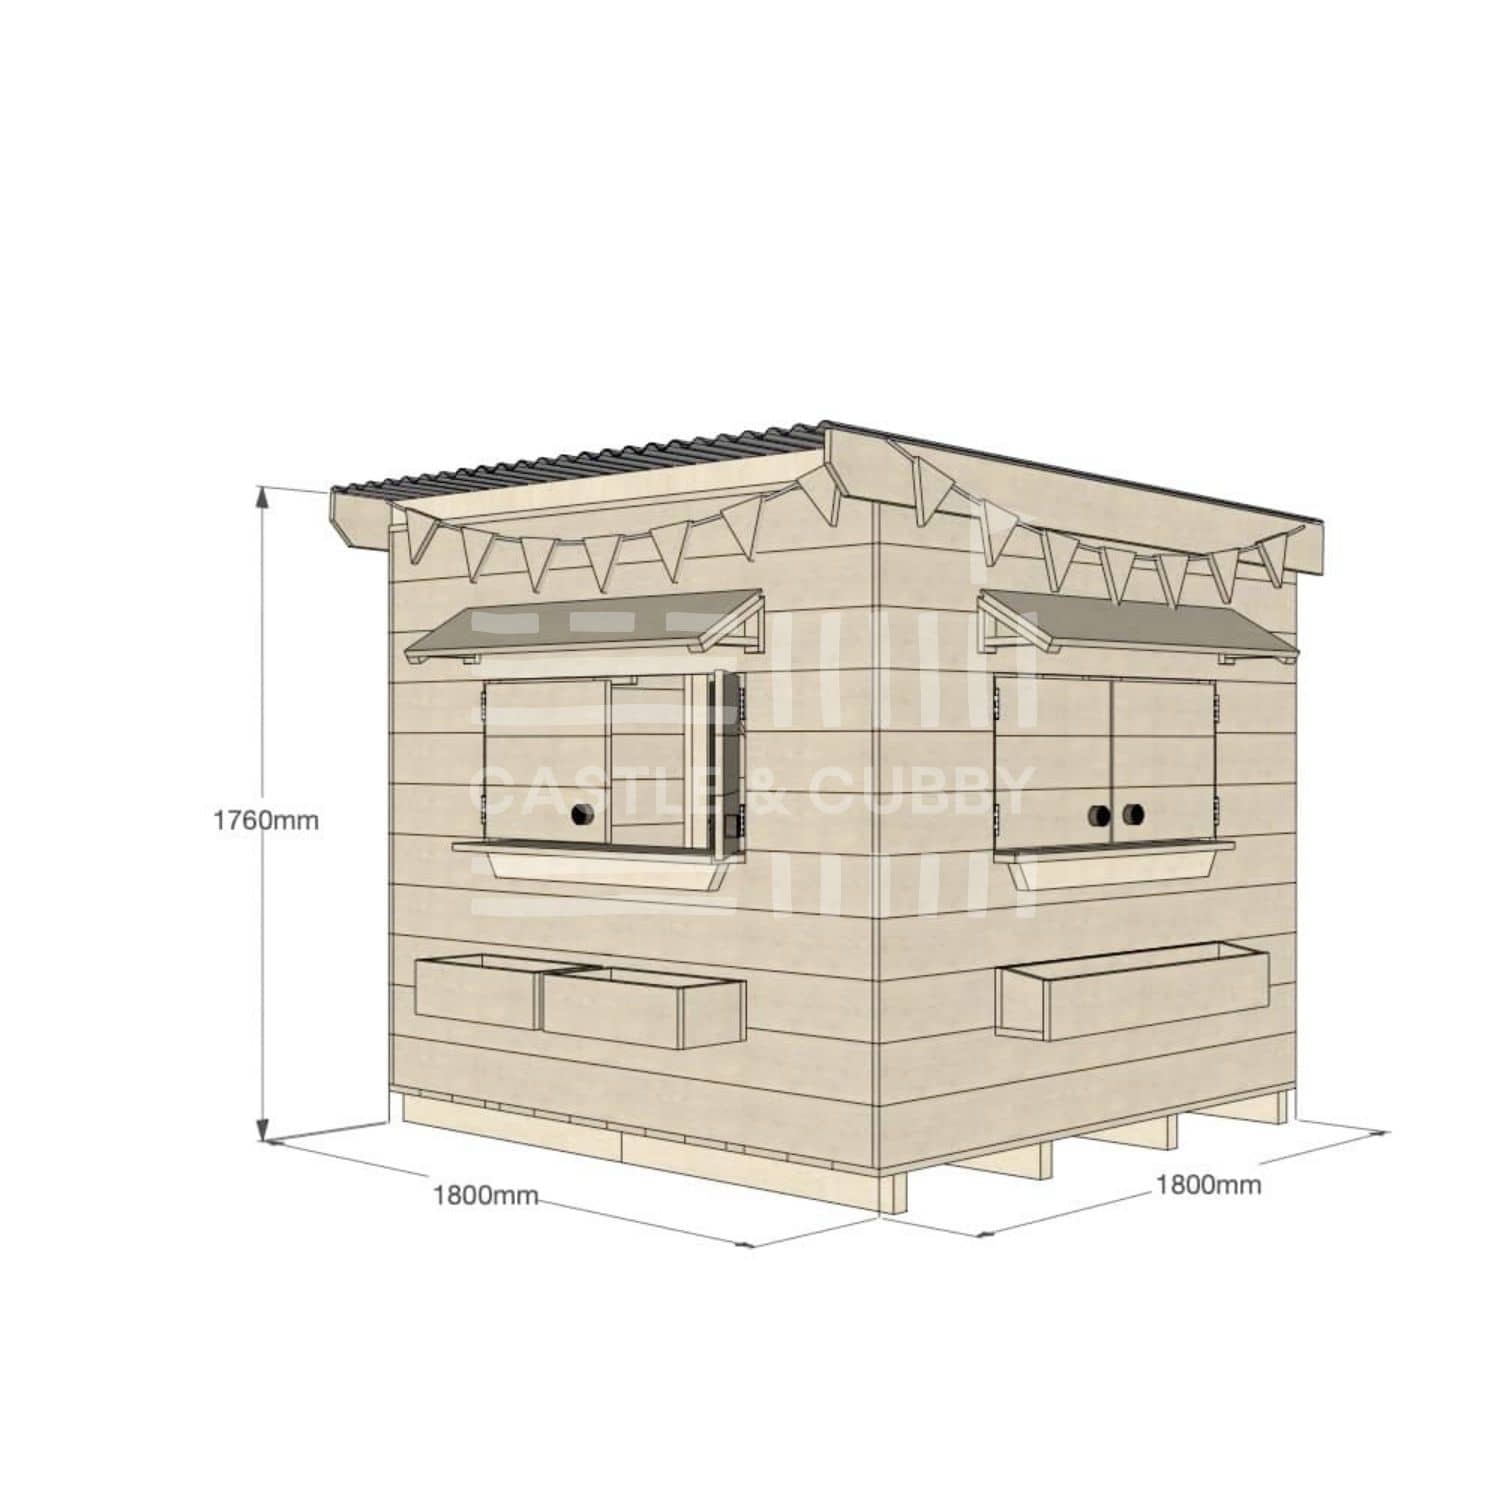 Flat roof raw wooden cubby house residential midi square with dimensions